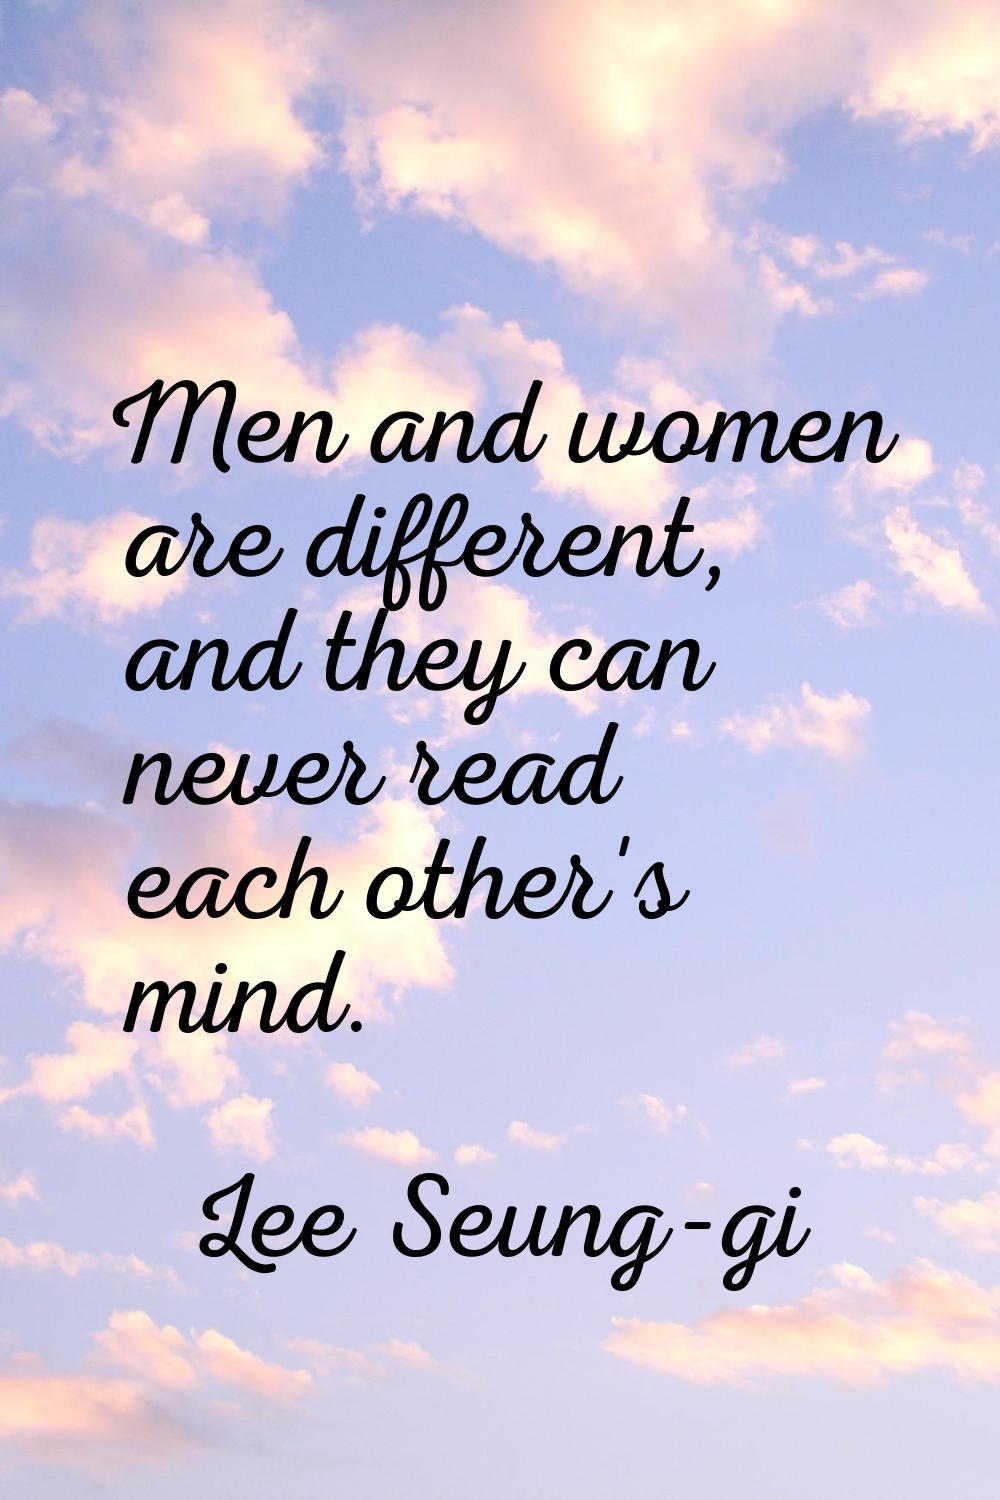 Men and women are different, and they can never read each other's mind.